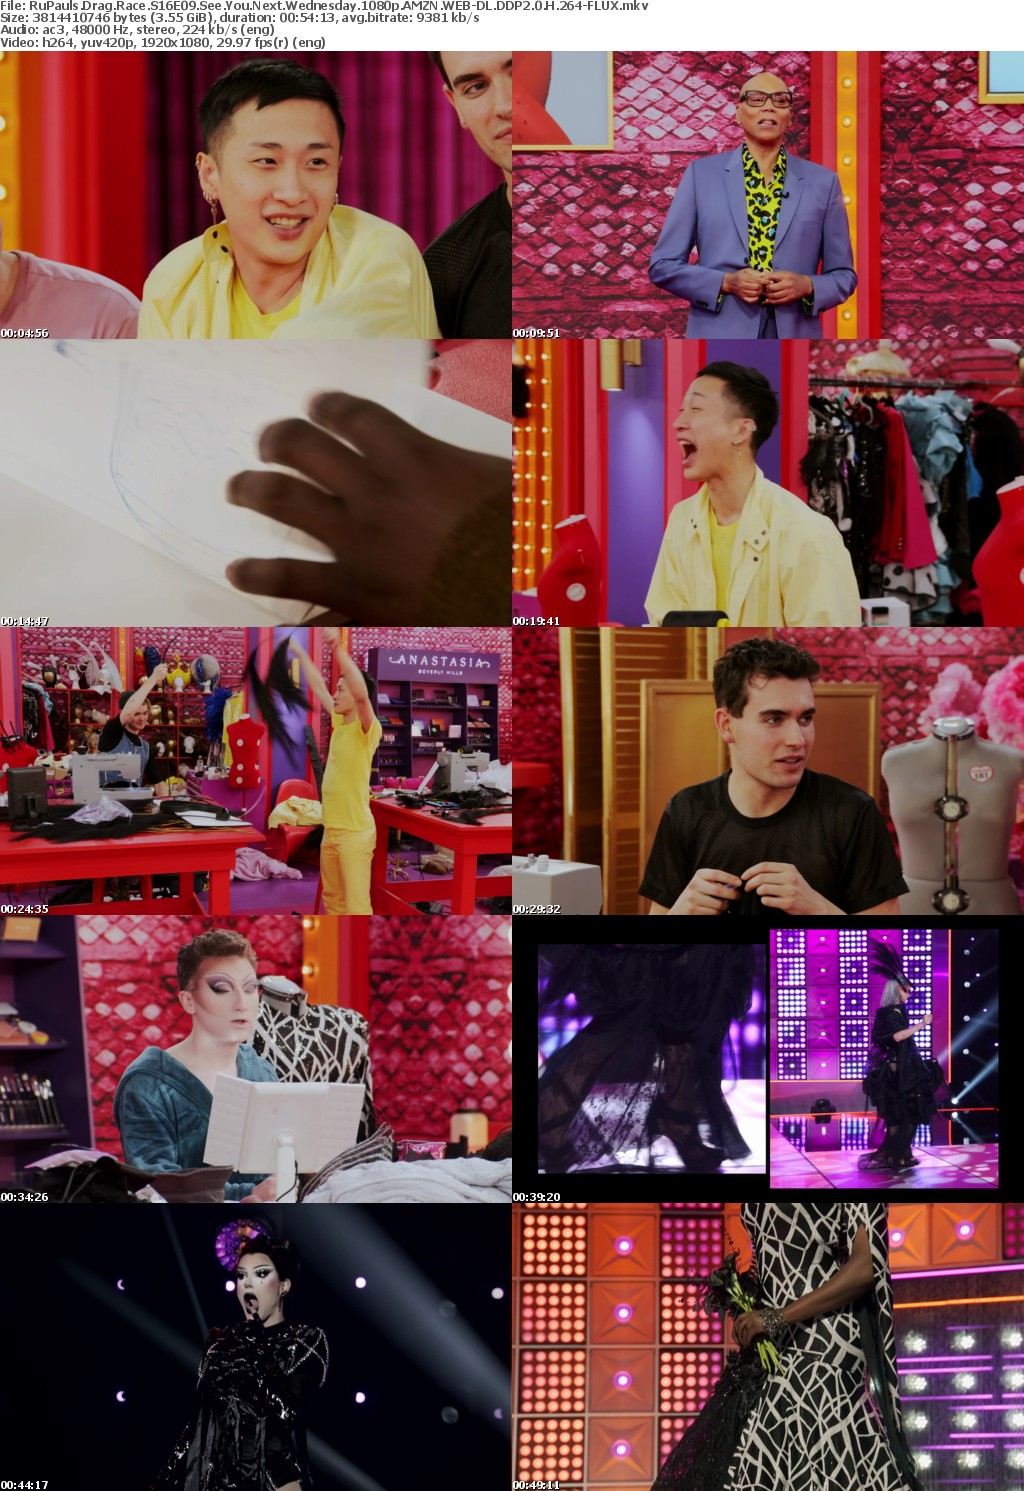 RuPauls Drag Race S16E09 See You Next Wednesday 1080p AMZN WEB-DL DDP2 0 H 264-FLUX